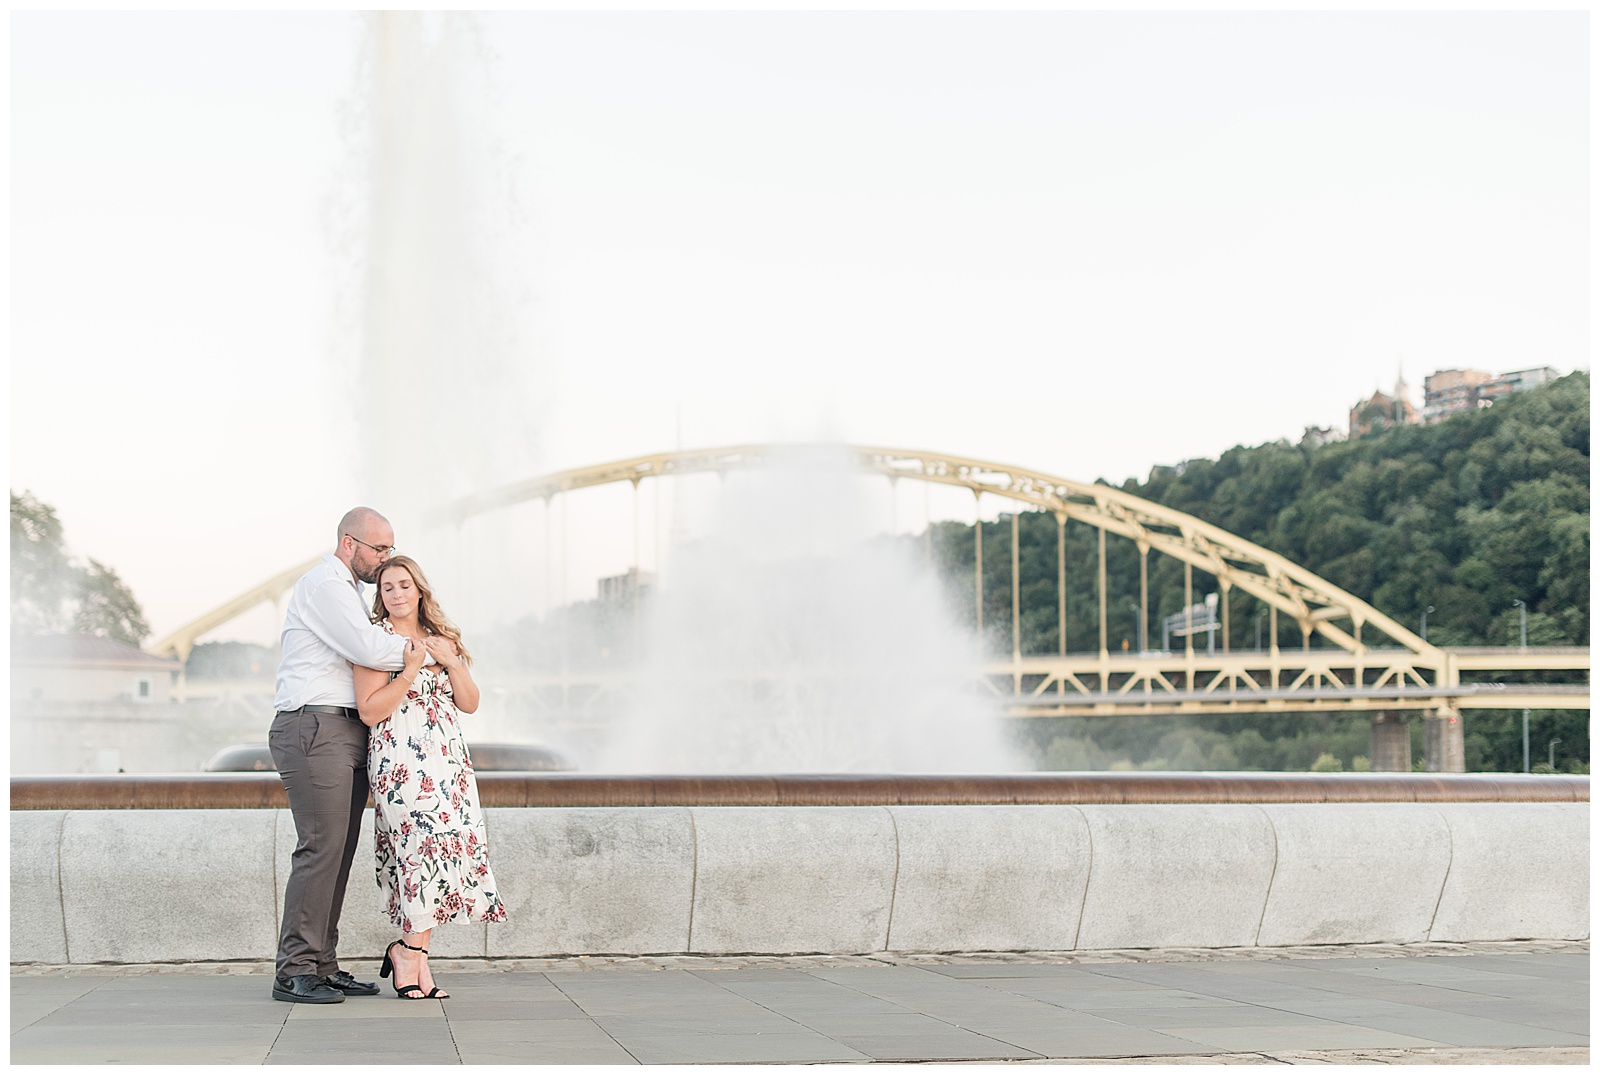 the couple is on the left hand side of the photo with the concrete wall and water fountain and white steel bridge and trees behind them and the guy is on the left turning towards the girl and embracing her with his arms around her shoulders as she faces the camera and leans into him and smiles in downtown Pittsburgh